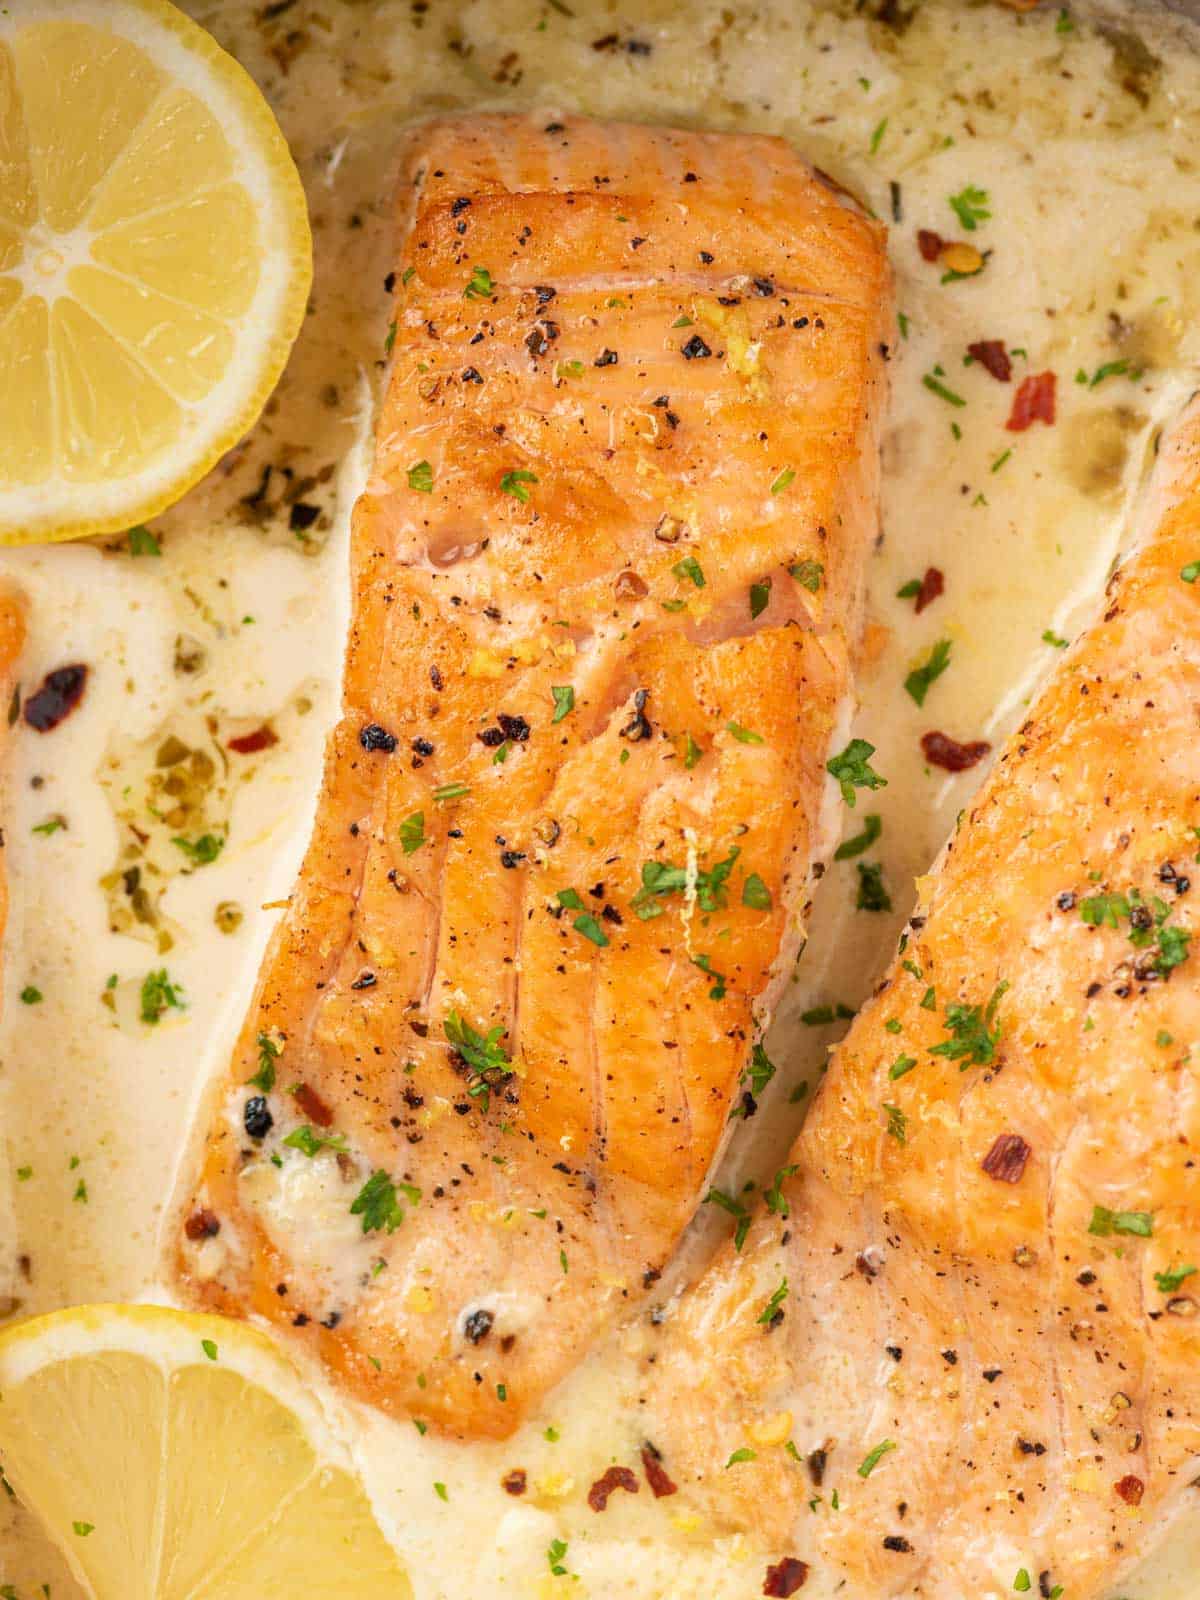 Close up of a salmon fillet in a lemon butter sauce.